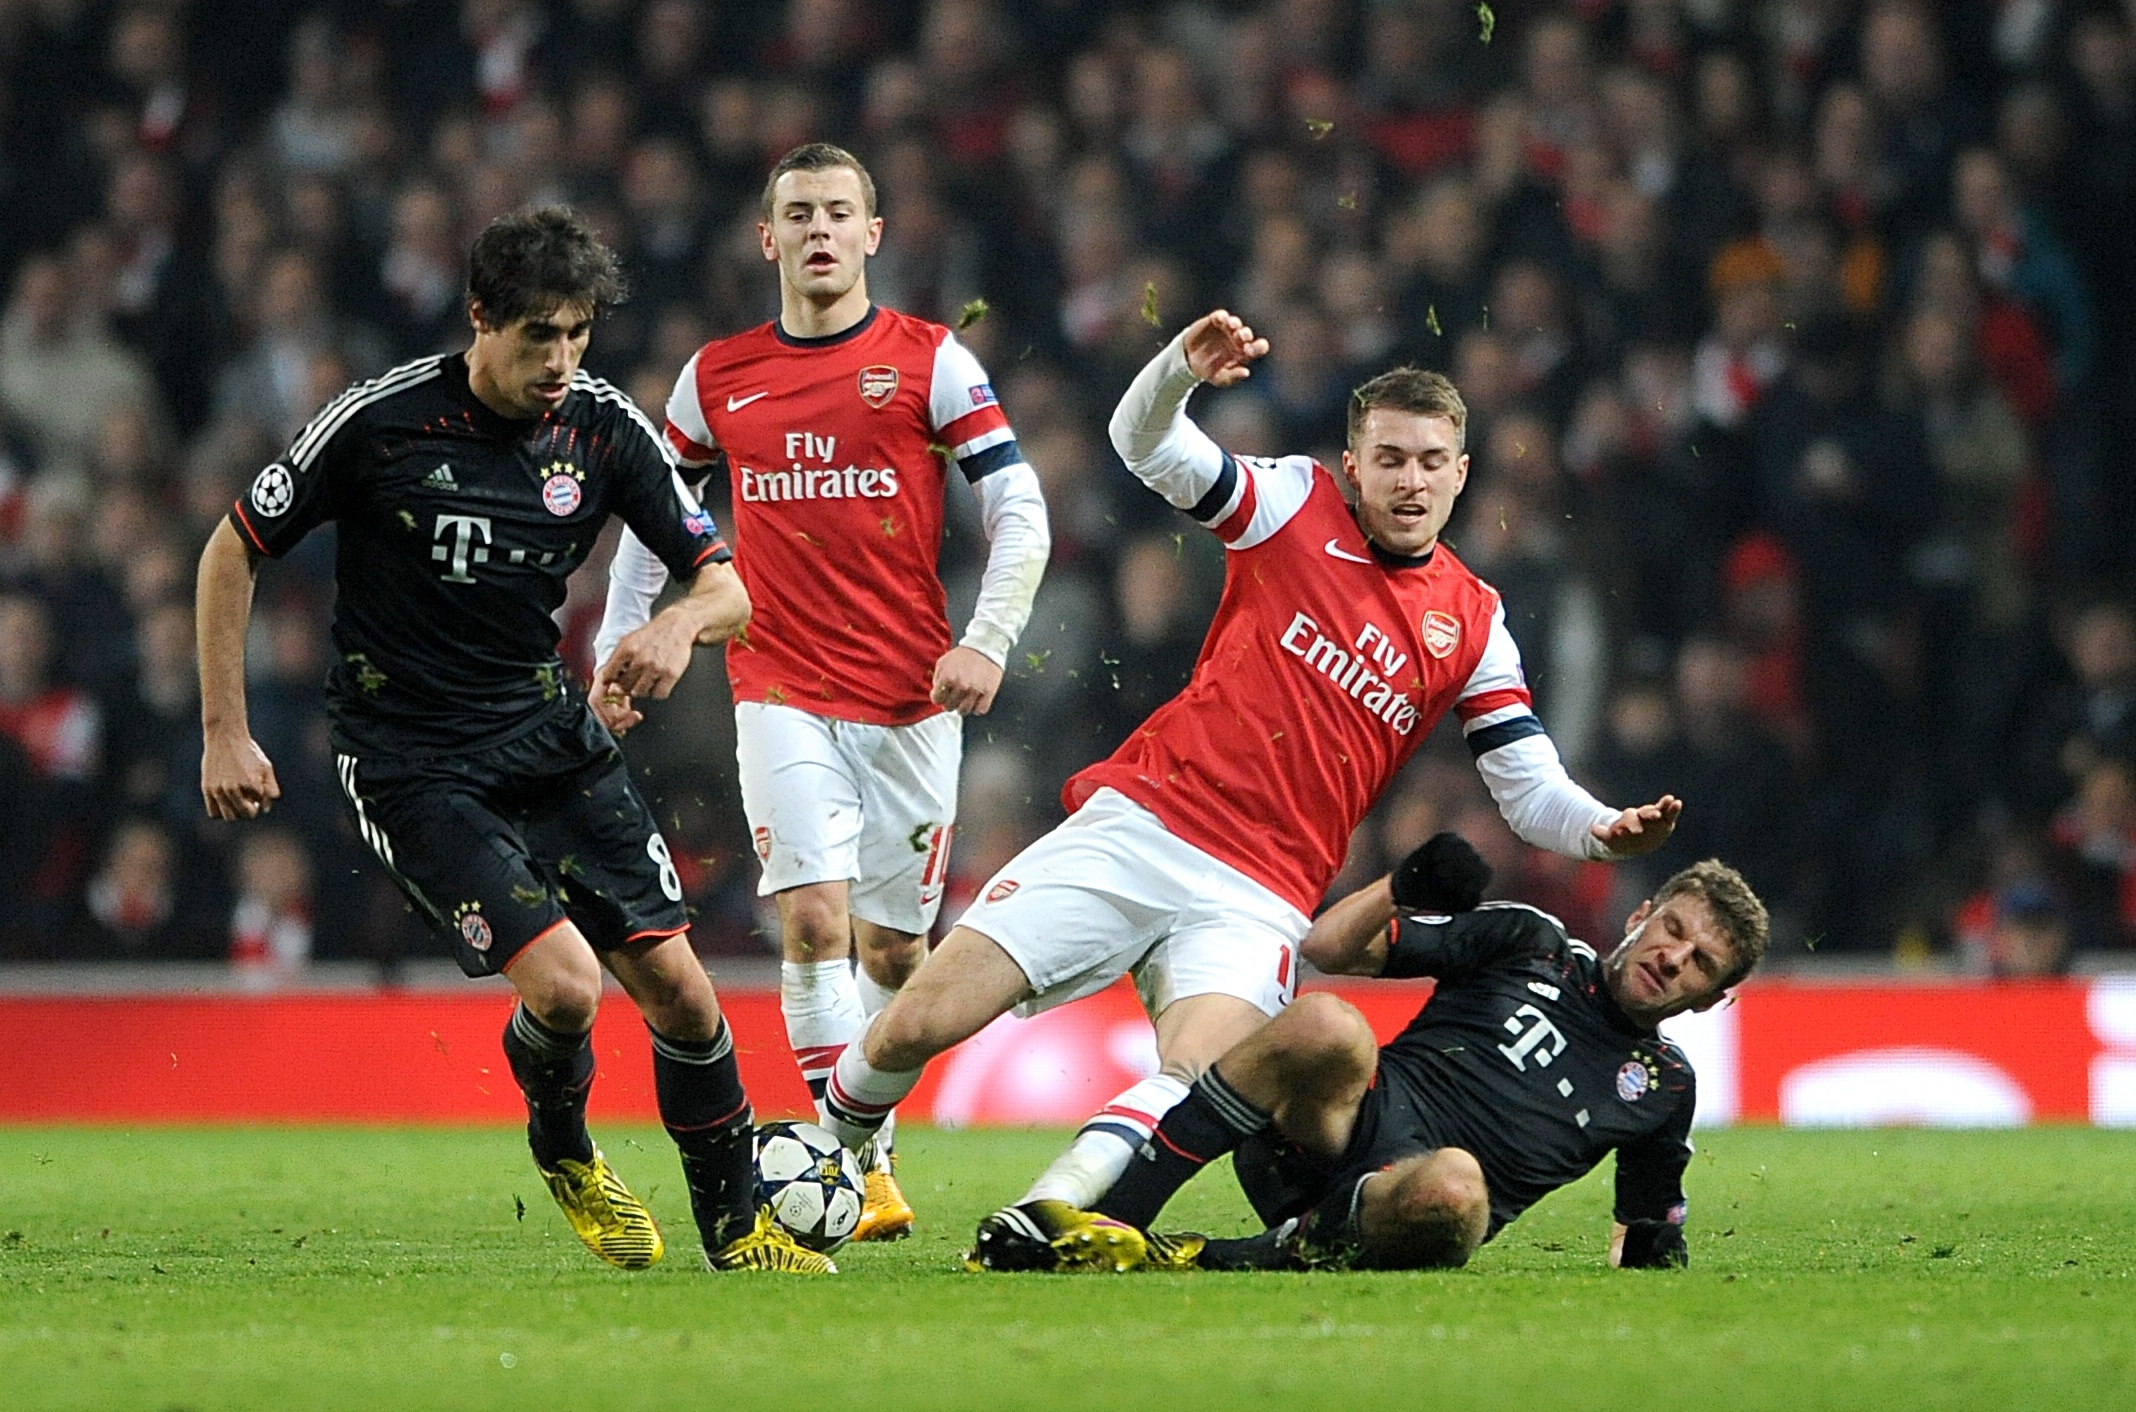 Bayern Munich's Thomas Muller (right) and Arsenal's Aaron Ramsey battle for the ball during the UEFA Champions League match at Emirates Stadium, London. PRESS ASSOCIATION Photo. Picture date: Tuesday February 19, 2013. See PA story SOCCER Arsenal. Photo credit should read: Anthony Devlin/PA Wire